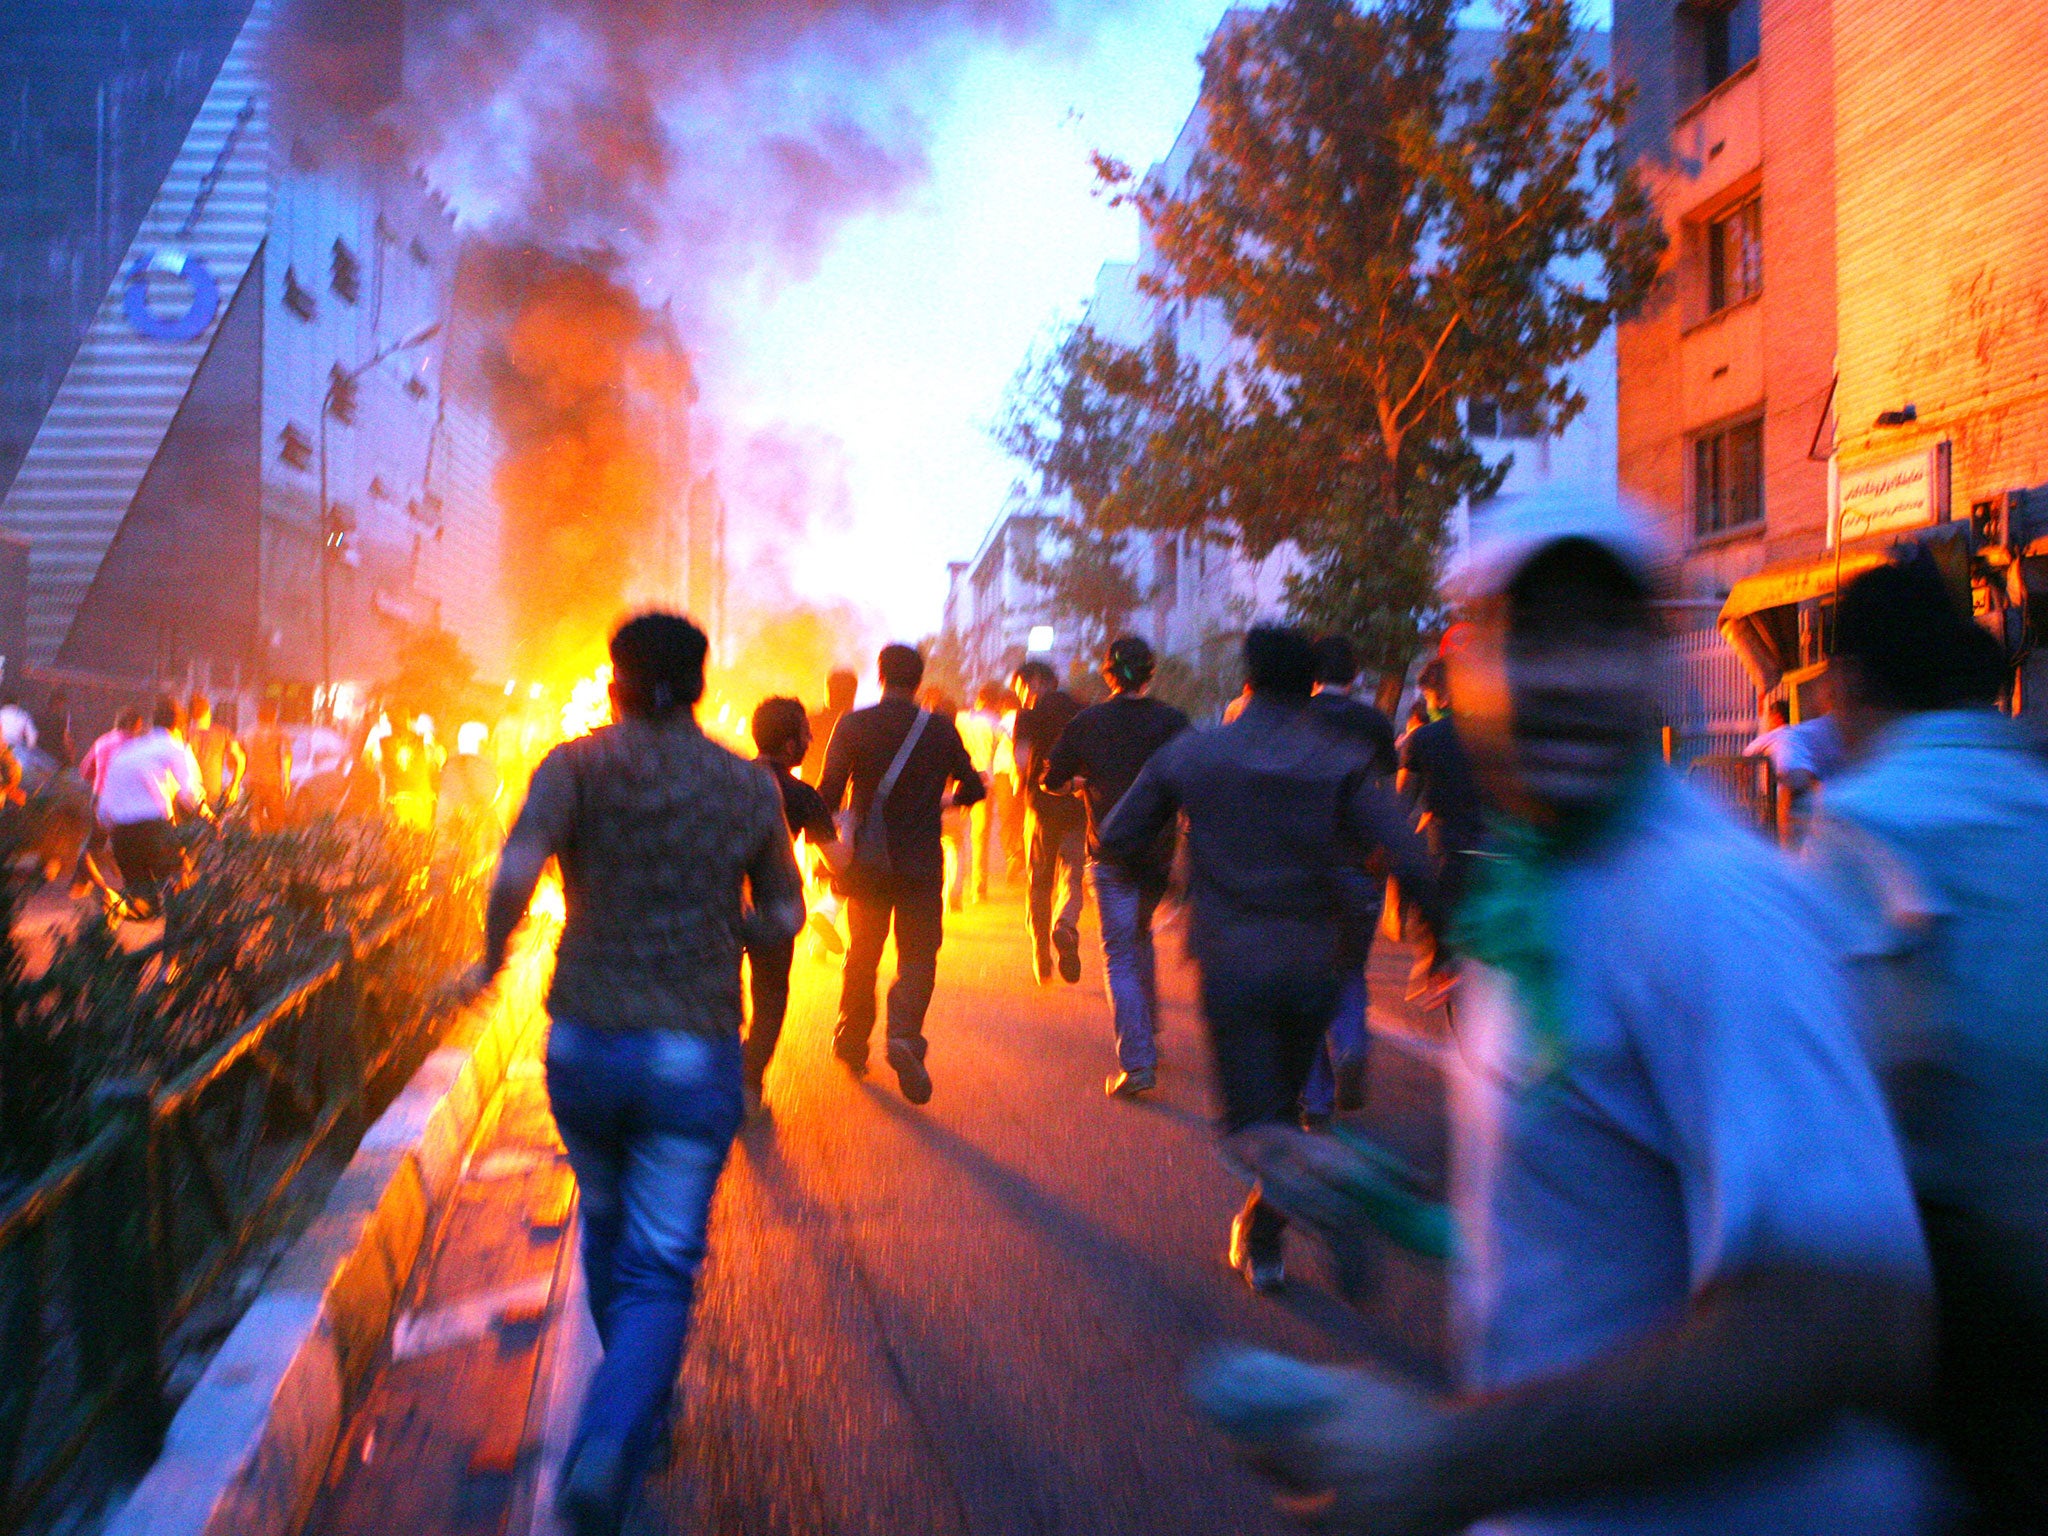 Anger in Tehran on 16 June 2009 at the presidential election which critics say was unfairly won by Mahmoud Ahmadinejad